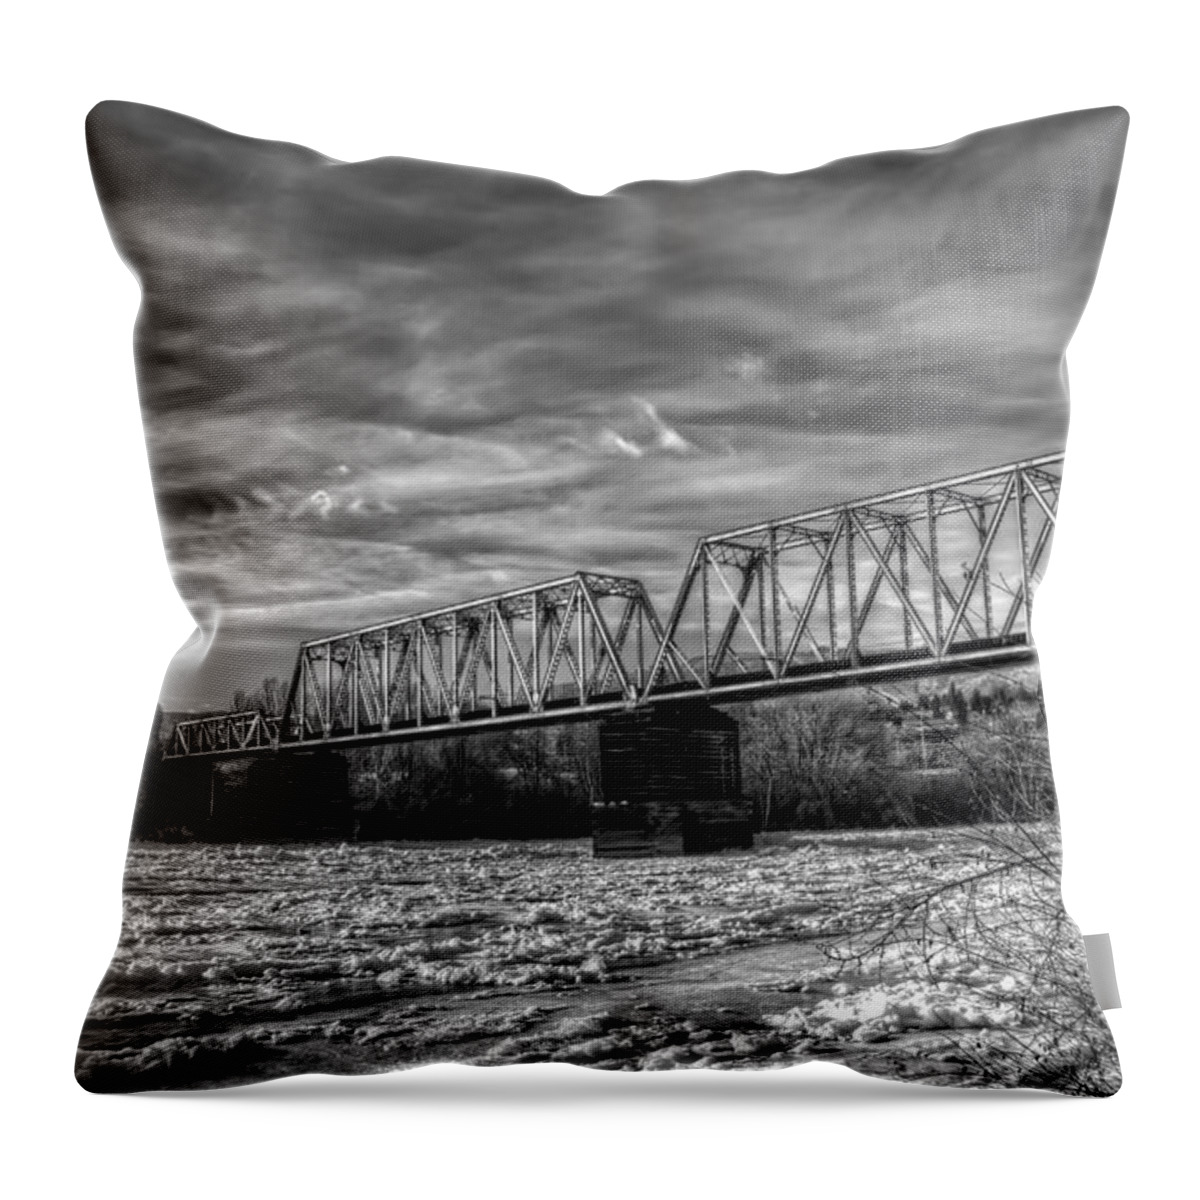 Hdr Throw Pillow featuring the photograph Frozen Tracks by Brad Granger